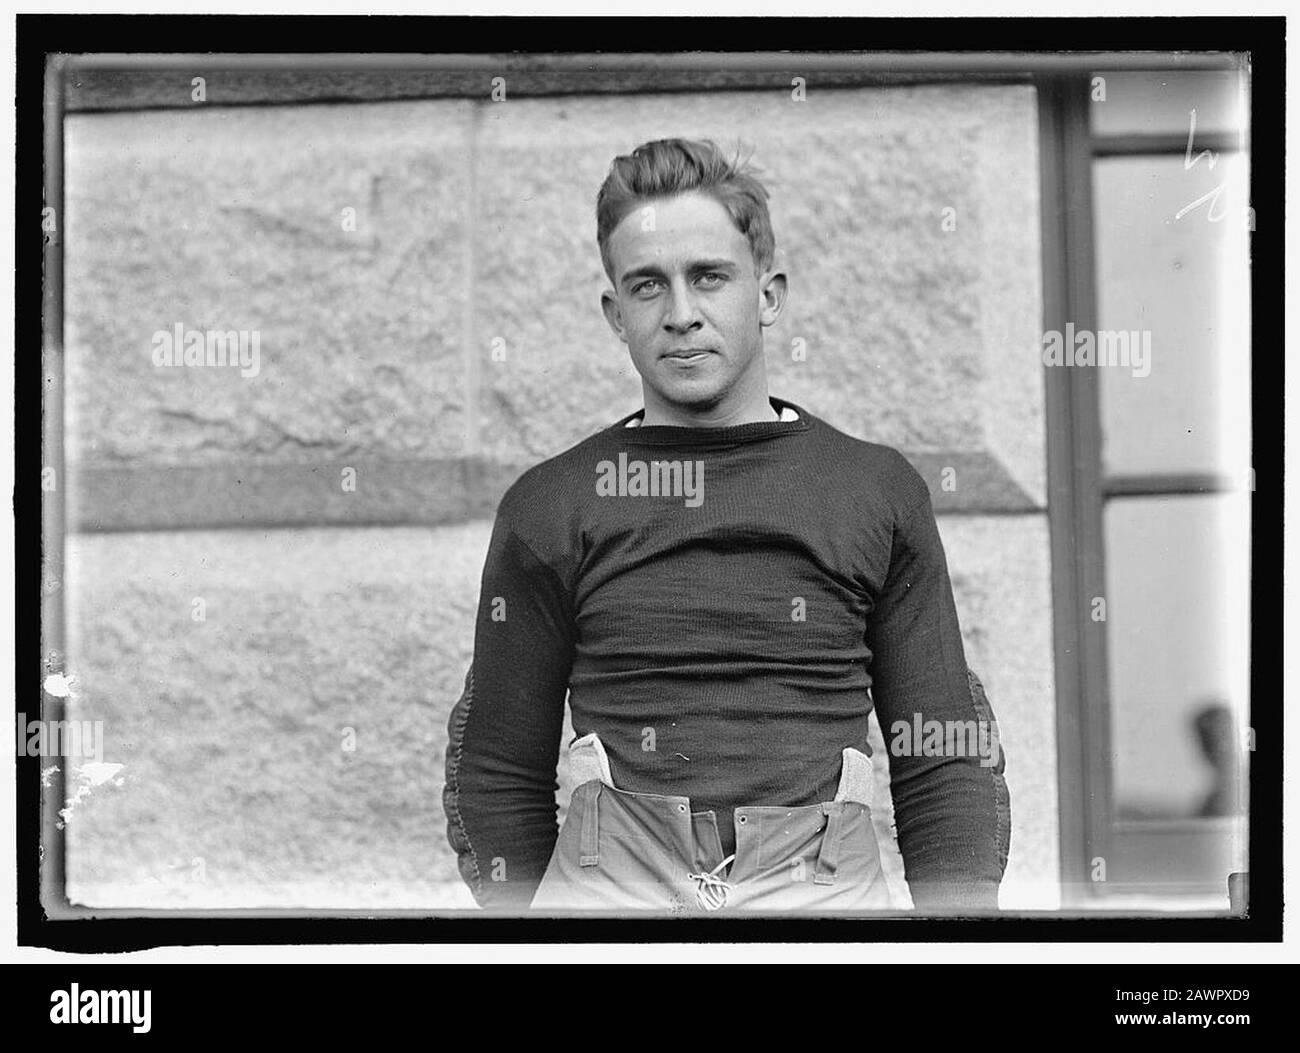 Vintage football players Cut Out Stock Images & Pictures - Alamy